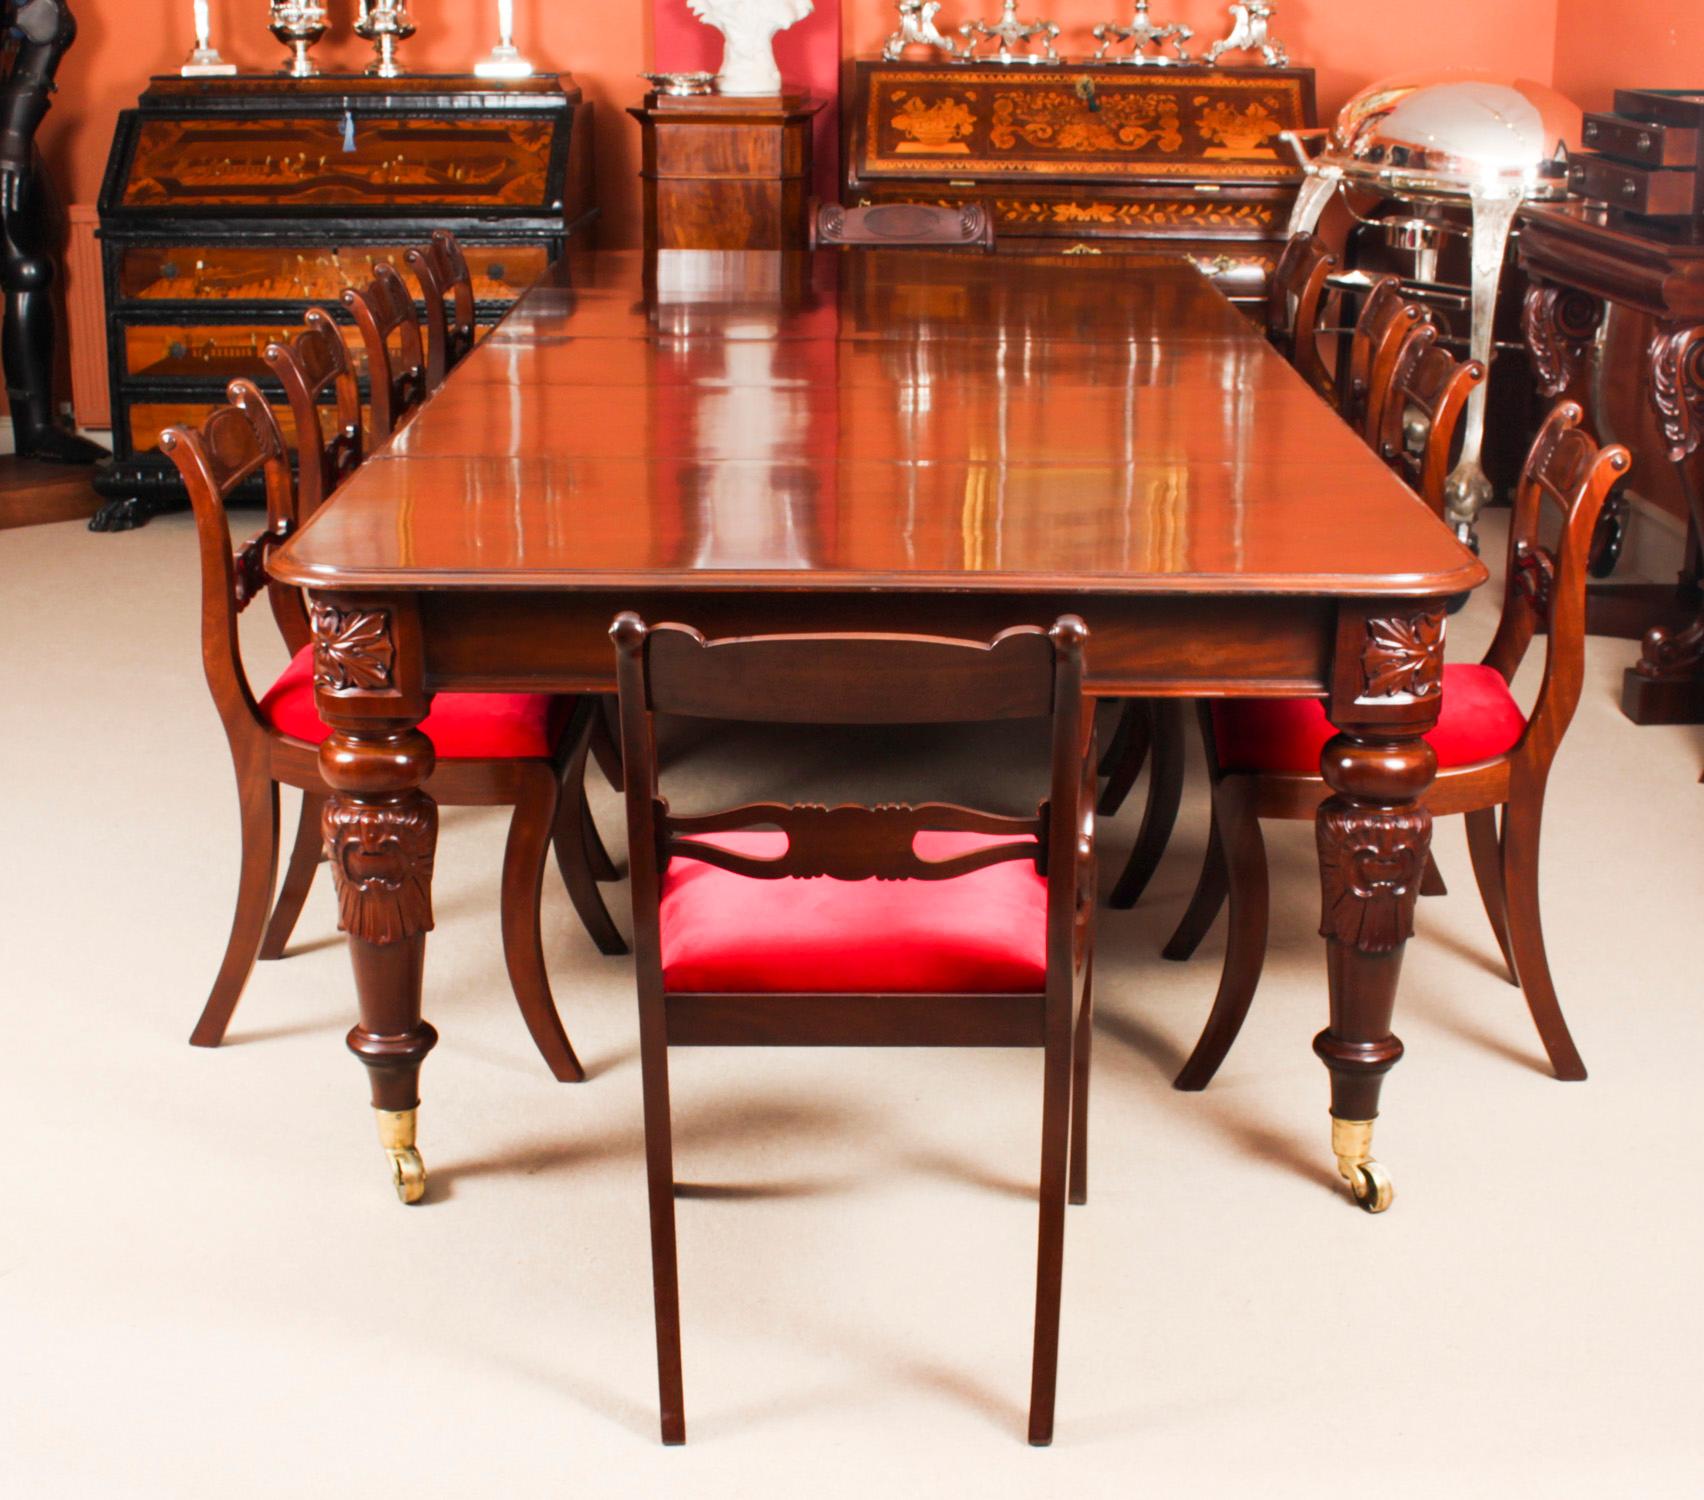 This is a fantastic dining set comprising of an antique William IV solid mahogany telescopic extending dining table, C1835 in date, with an antique set of ten Regency Dining Chairs, Circa 1830.

The beautiful dining table is in stunning flame